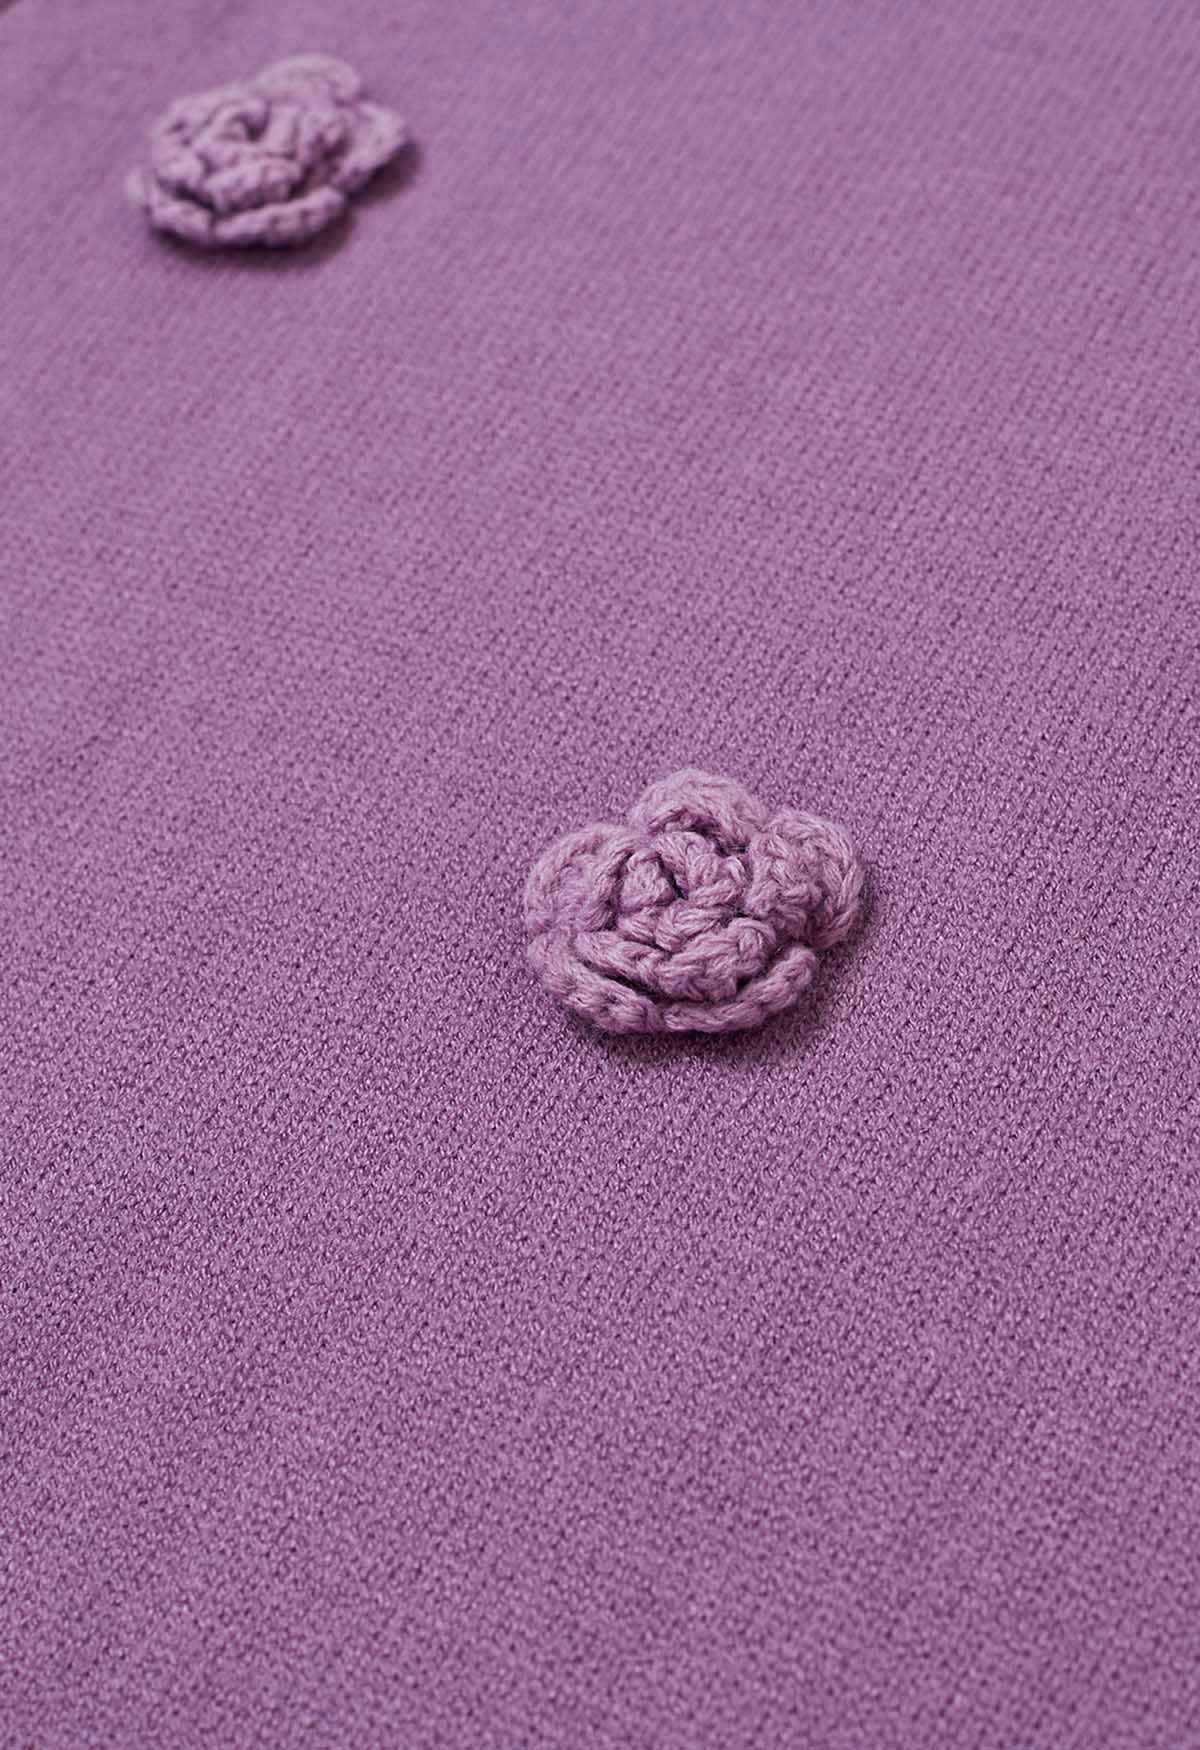 Scoop Neck Stitch Flower Knit Dress in Lilac - Retro, Indie and Unique ...